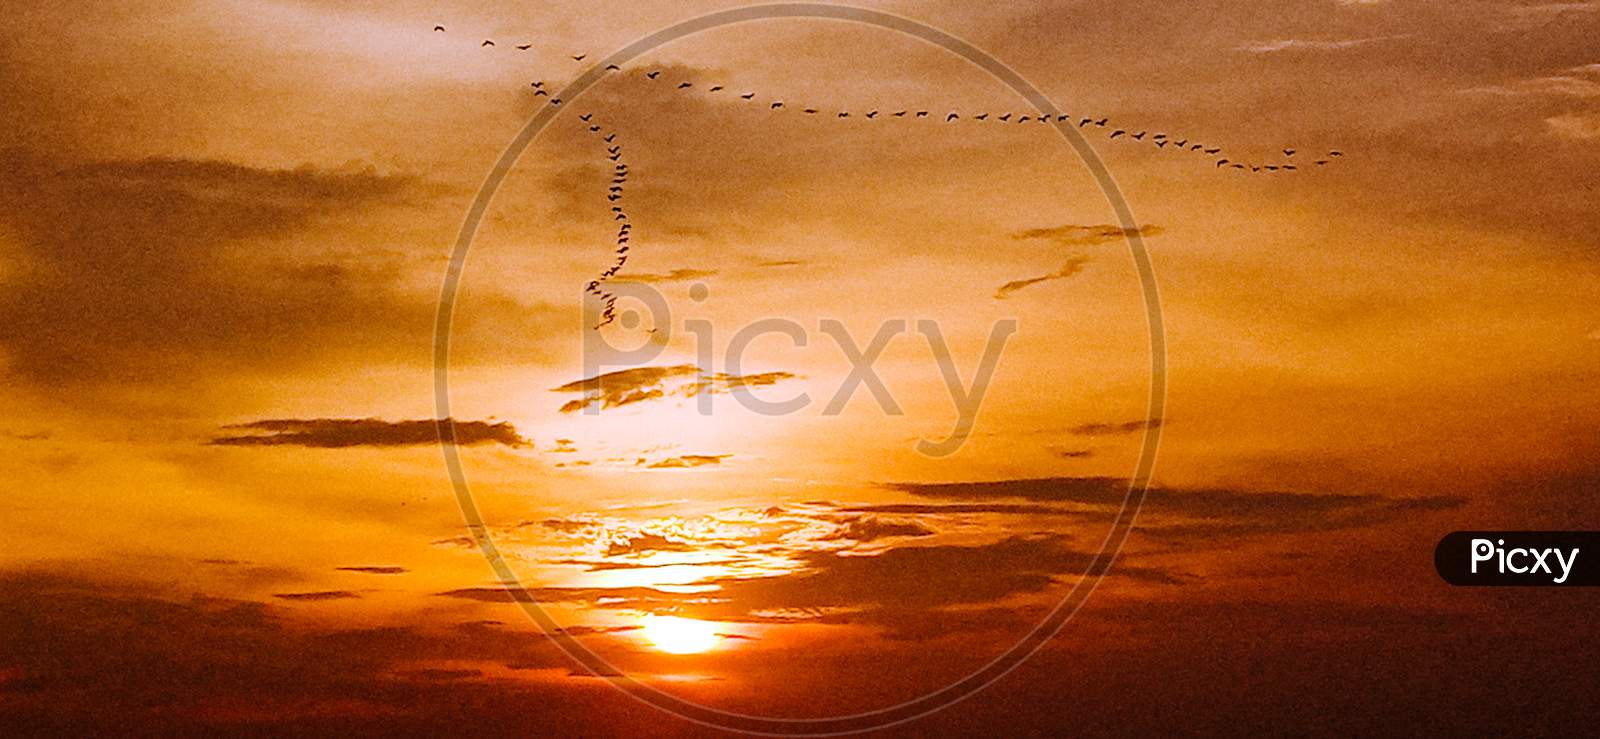 The beautiful sunset with flying birds.